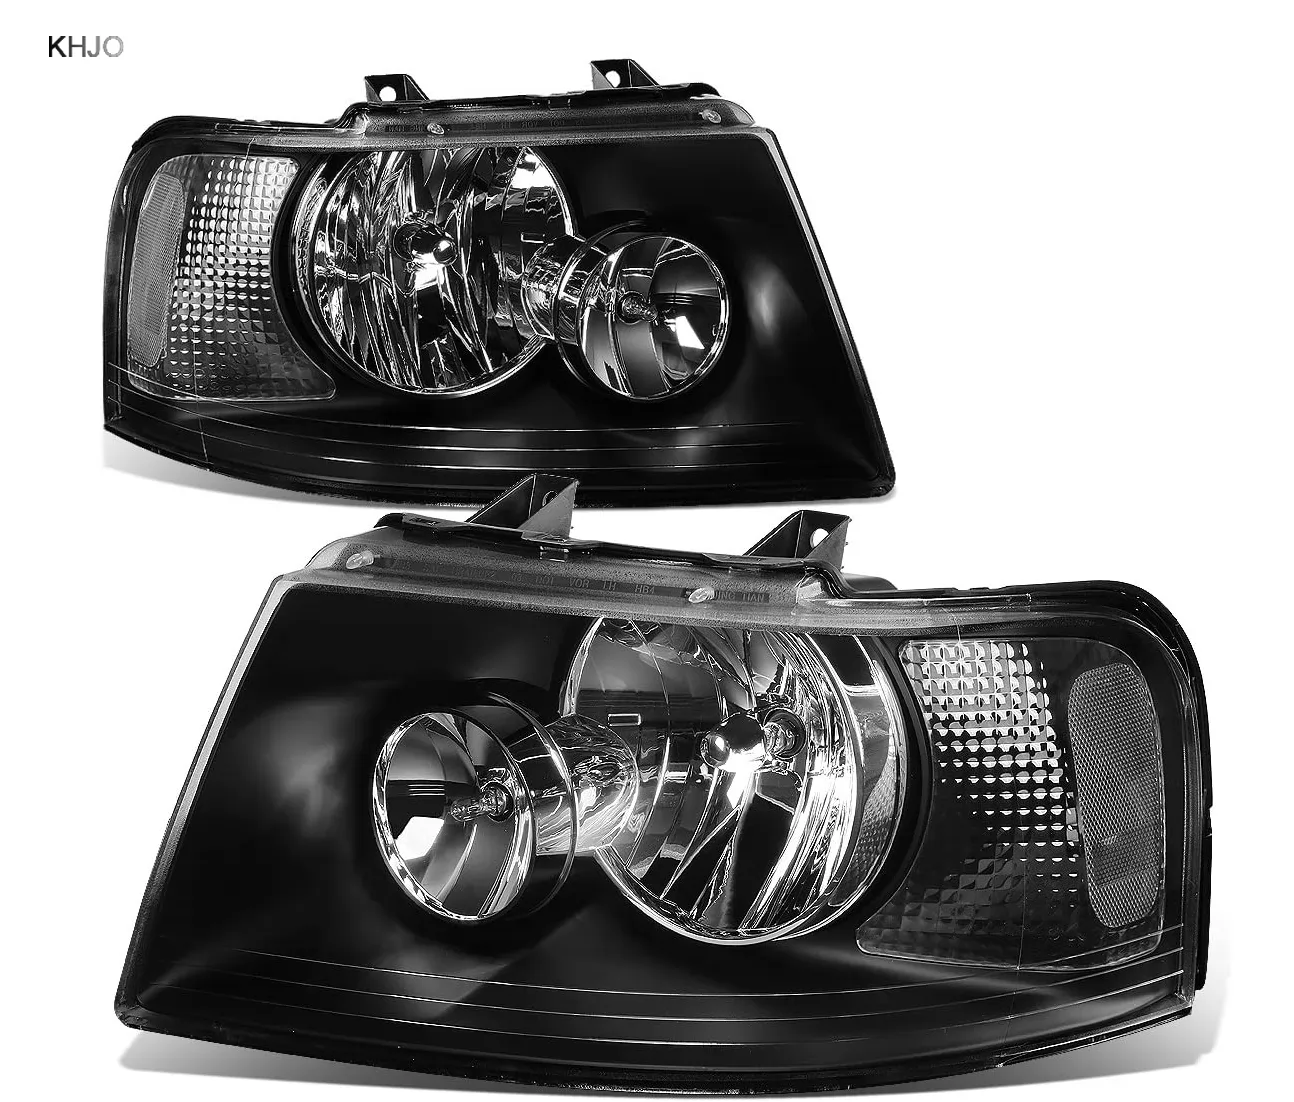 KHJO HL-OH-FEXPE03-BK-CL1 Black Housing Headlight Replacement For 03-06 Expedition